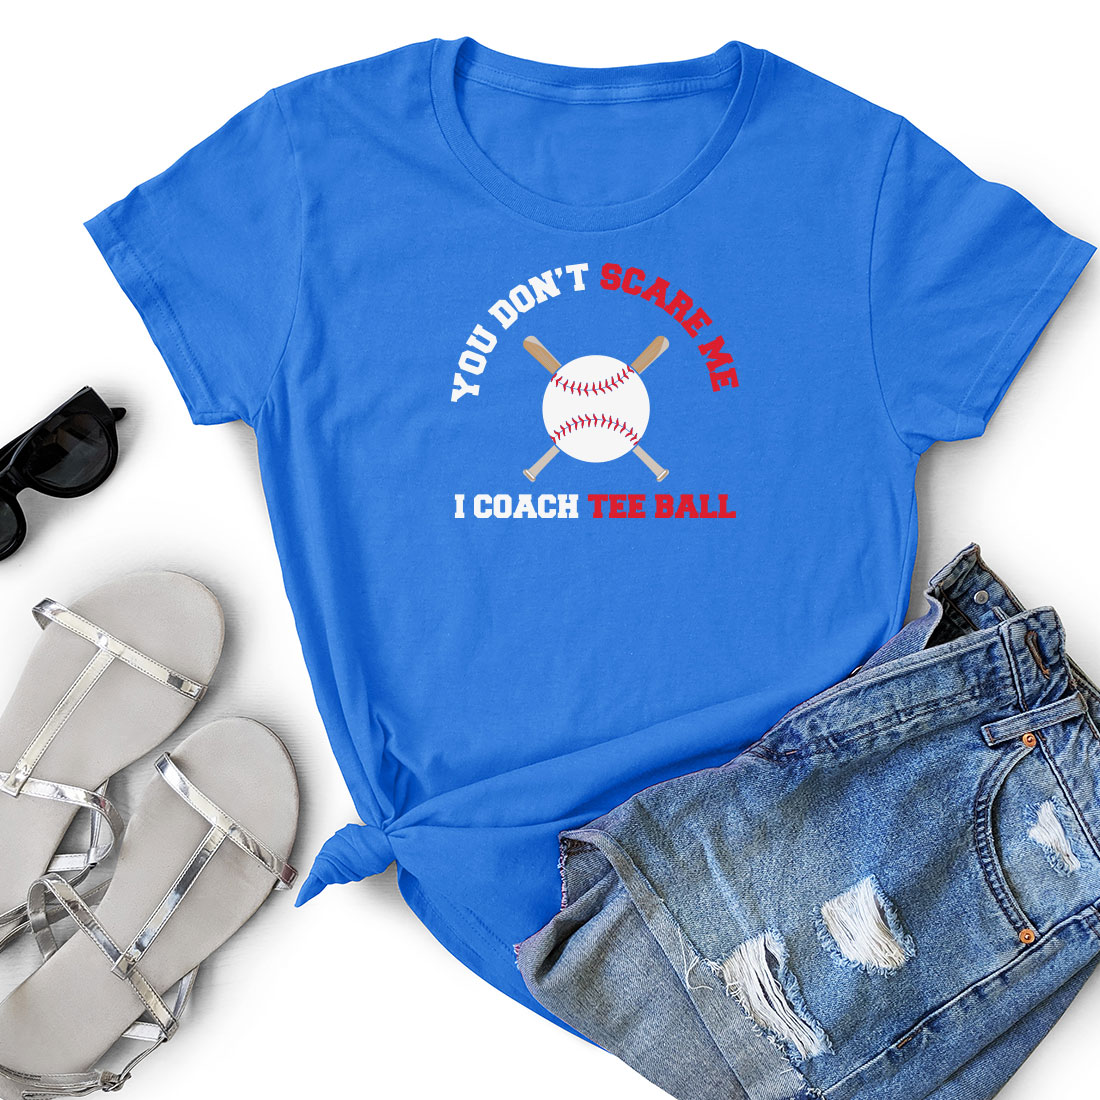 Women's t - shirt with a baseball bat and a ball on it.